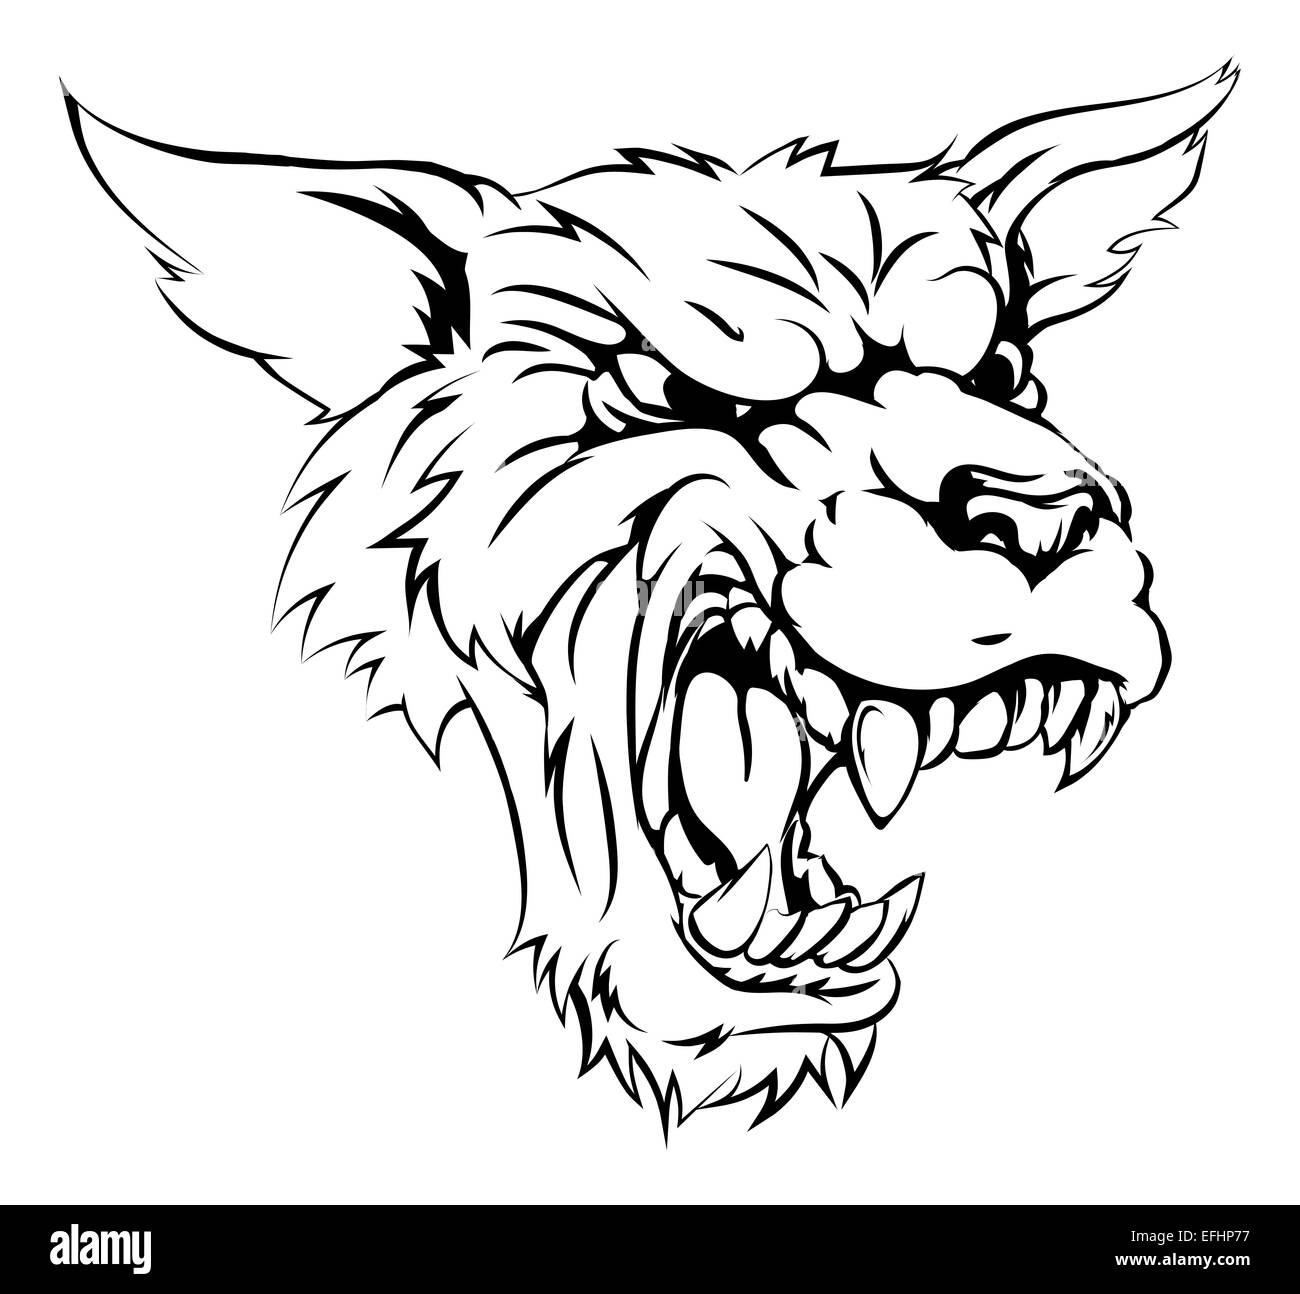 Mean looking werewolf or wolf character roaring and snarling in black and white Stock Photo